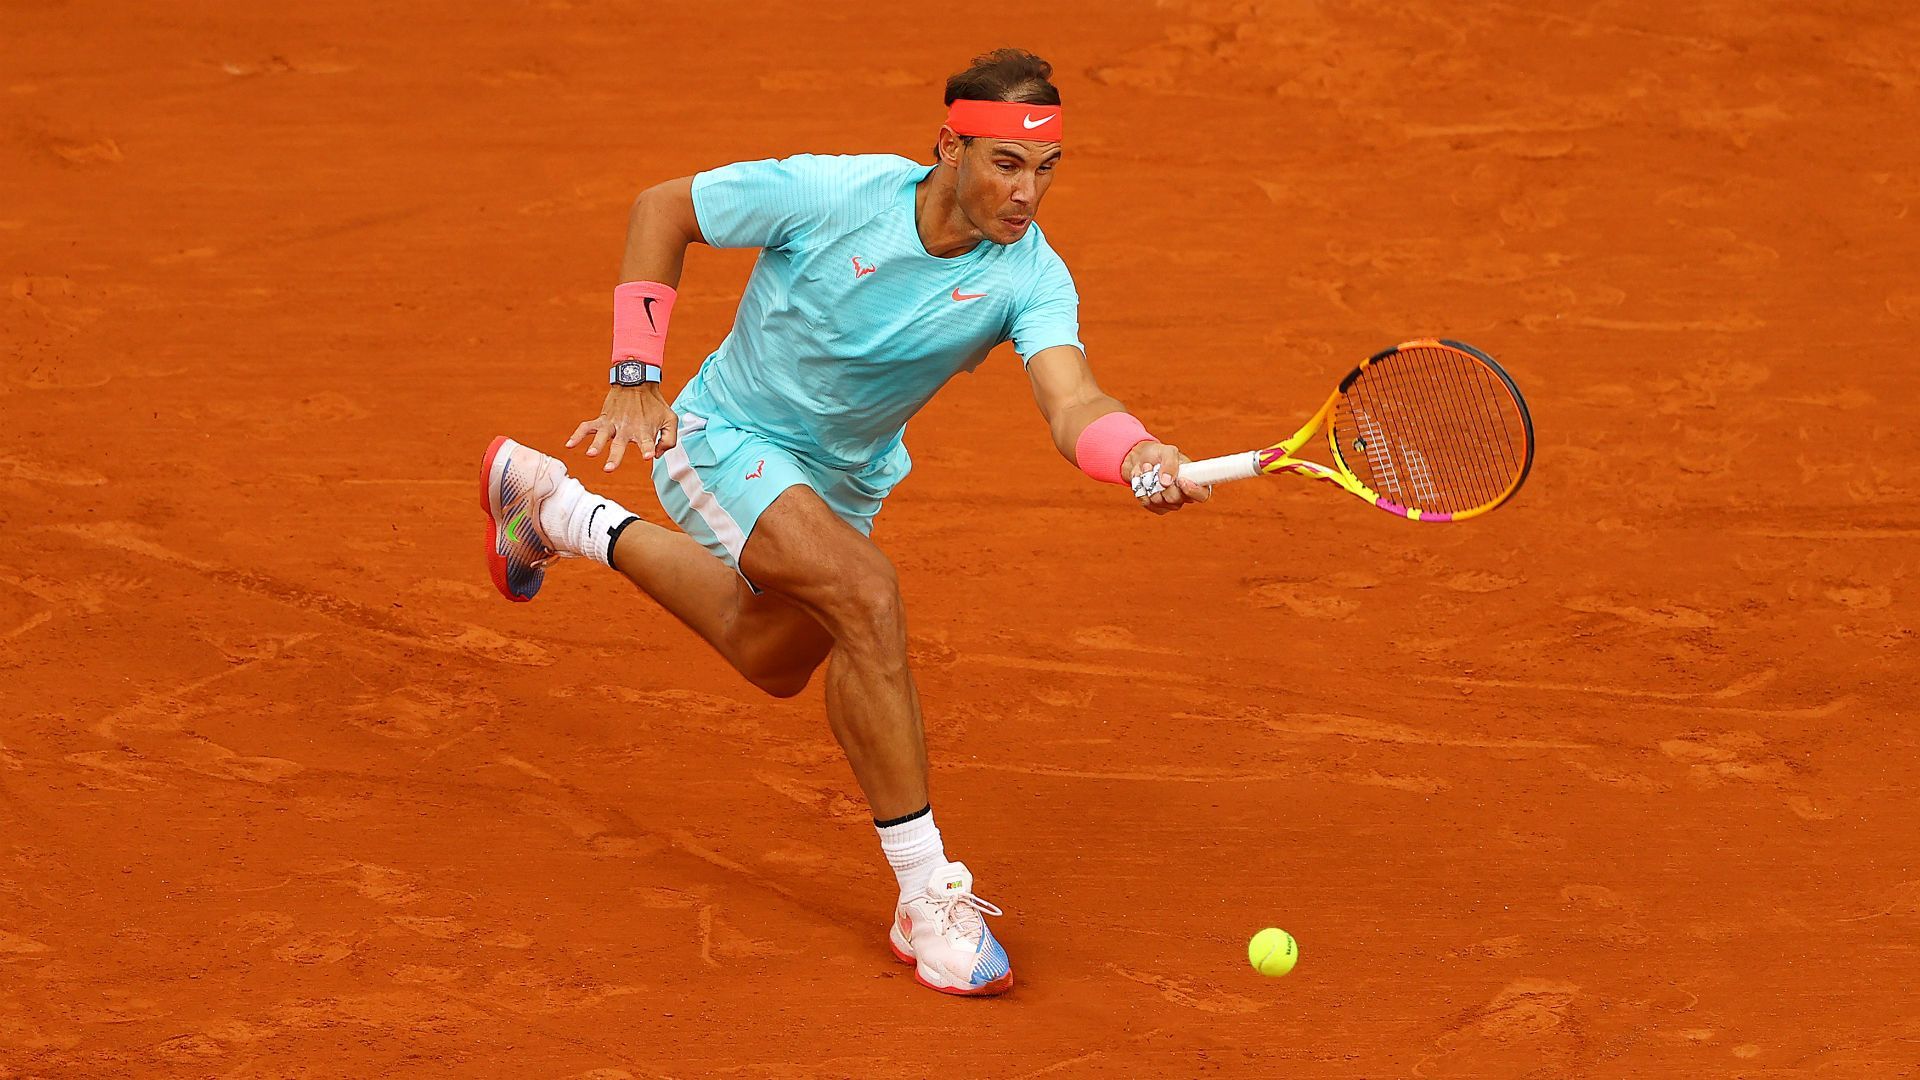 French Open 2020: Nadal starts quest for 13th Roland Garros title in routine fashion